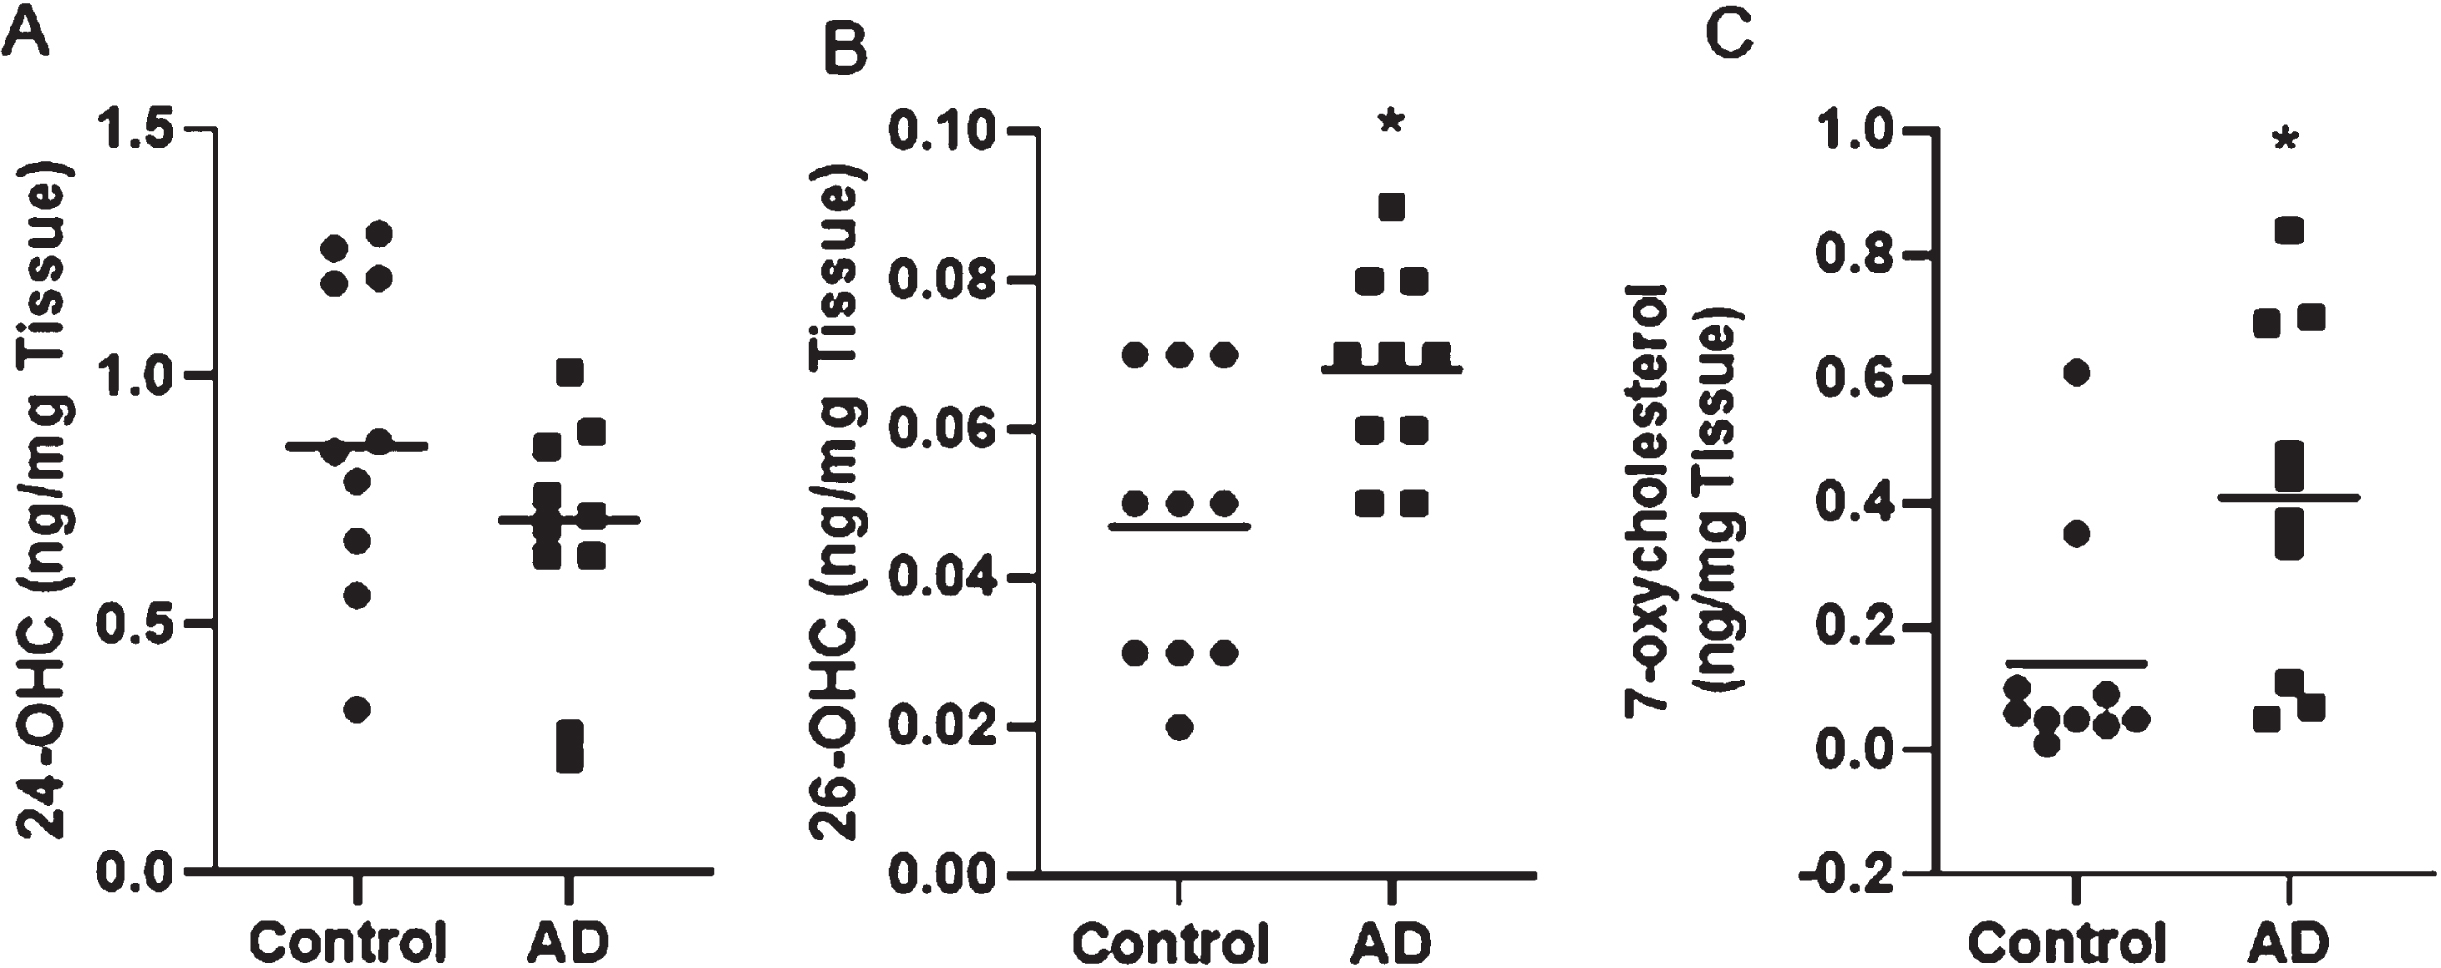 Oxysterol analysis in brain mitochondria. *Significant p-values are indicated where p < 0.05 was considered significant.